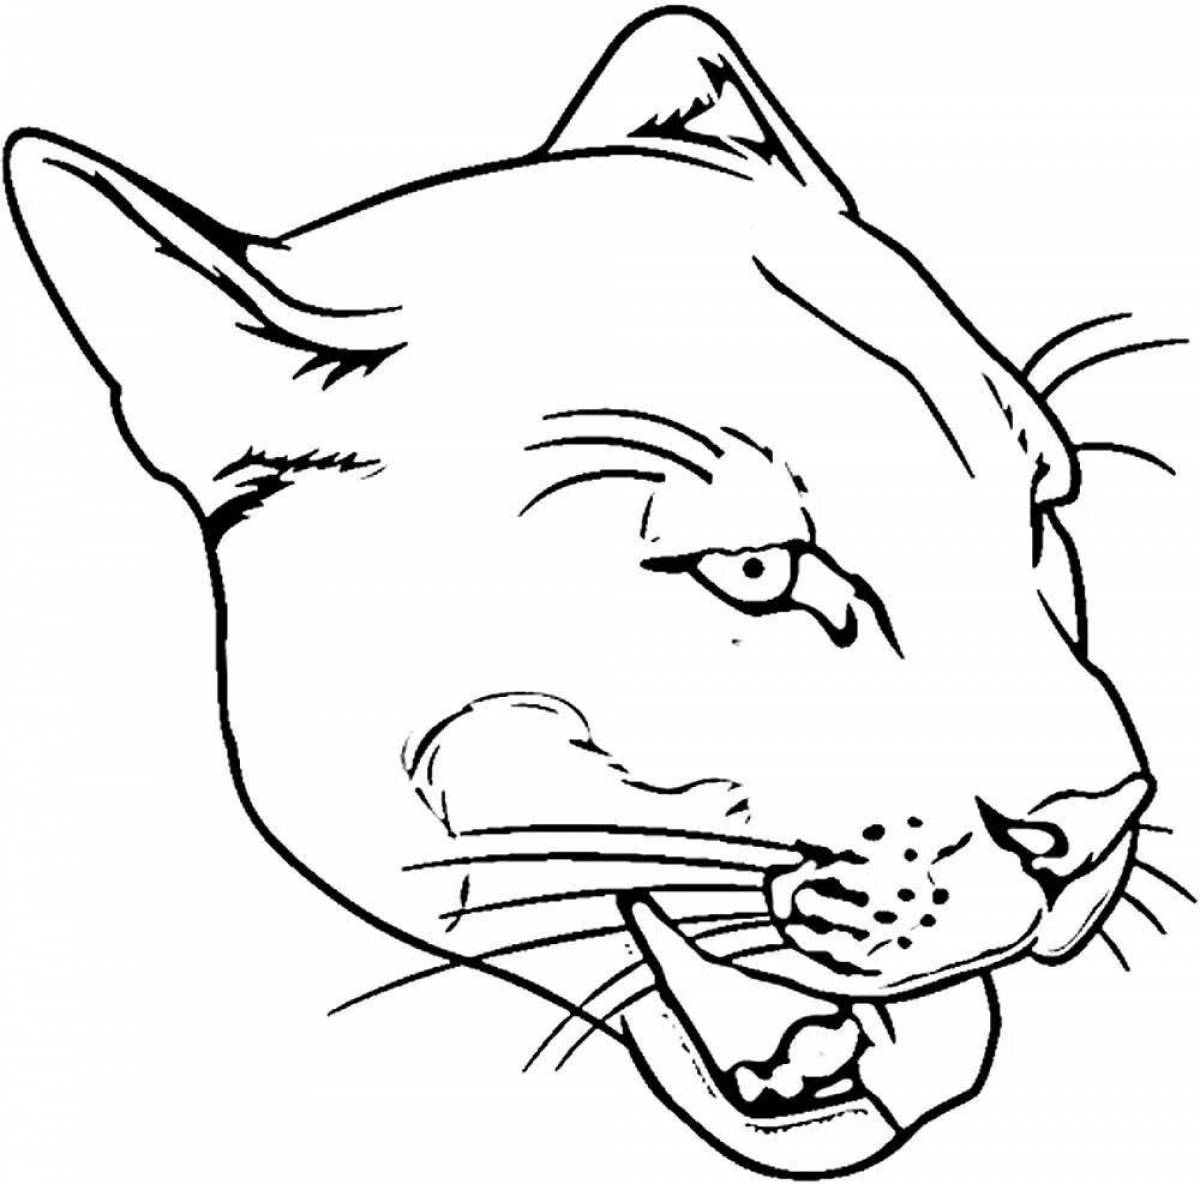 Courageous black panther coloring page